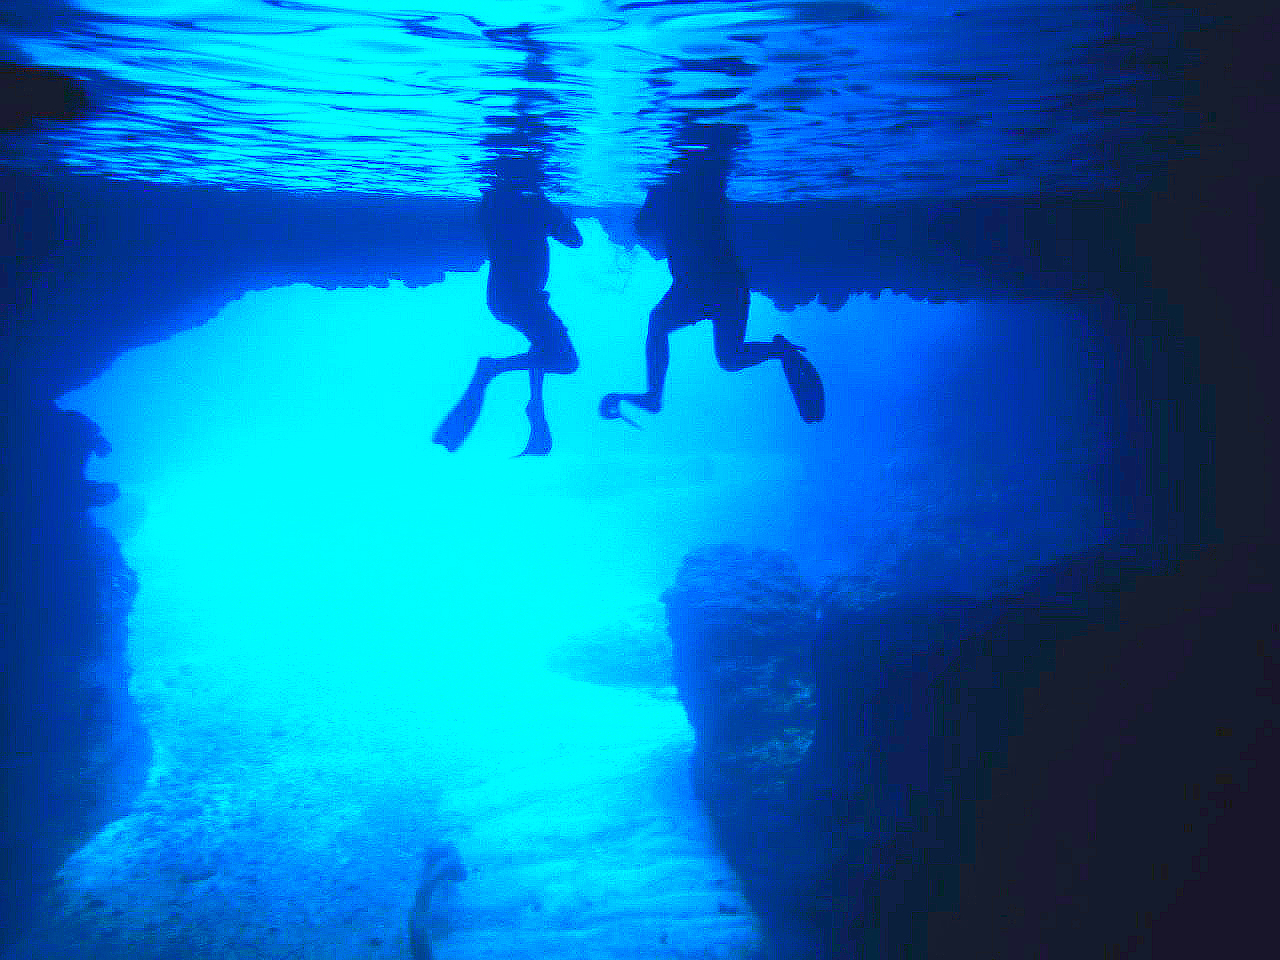 One of the fantastic activities to do on tanna is to visit the Blue cave on the northern tip of the Island. A trip by boat along the western coast provides travellers with a good view of the coast.